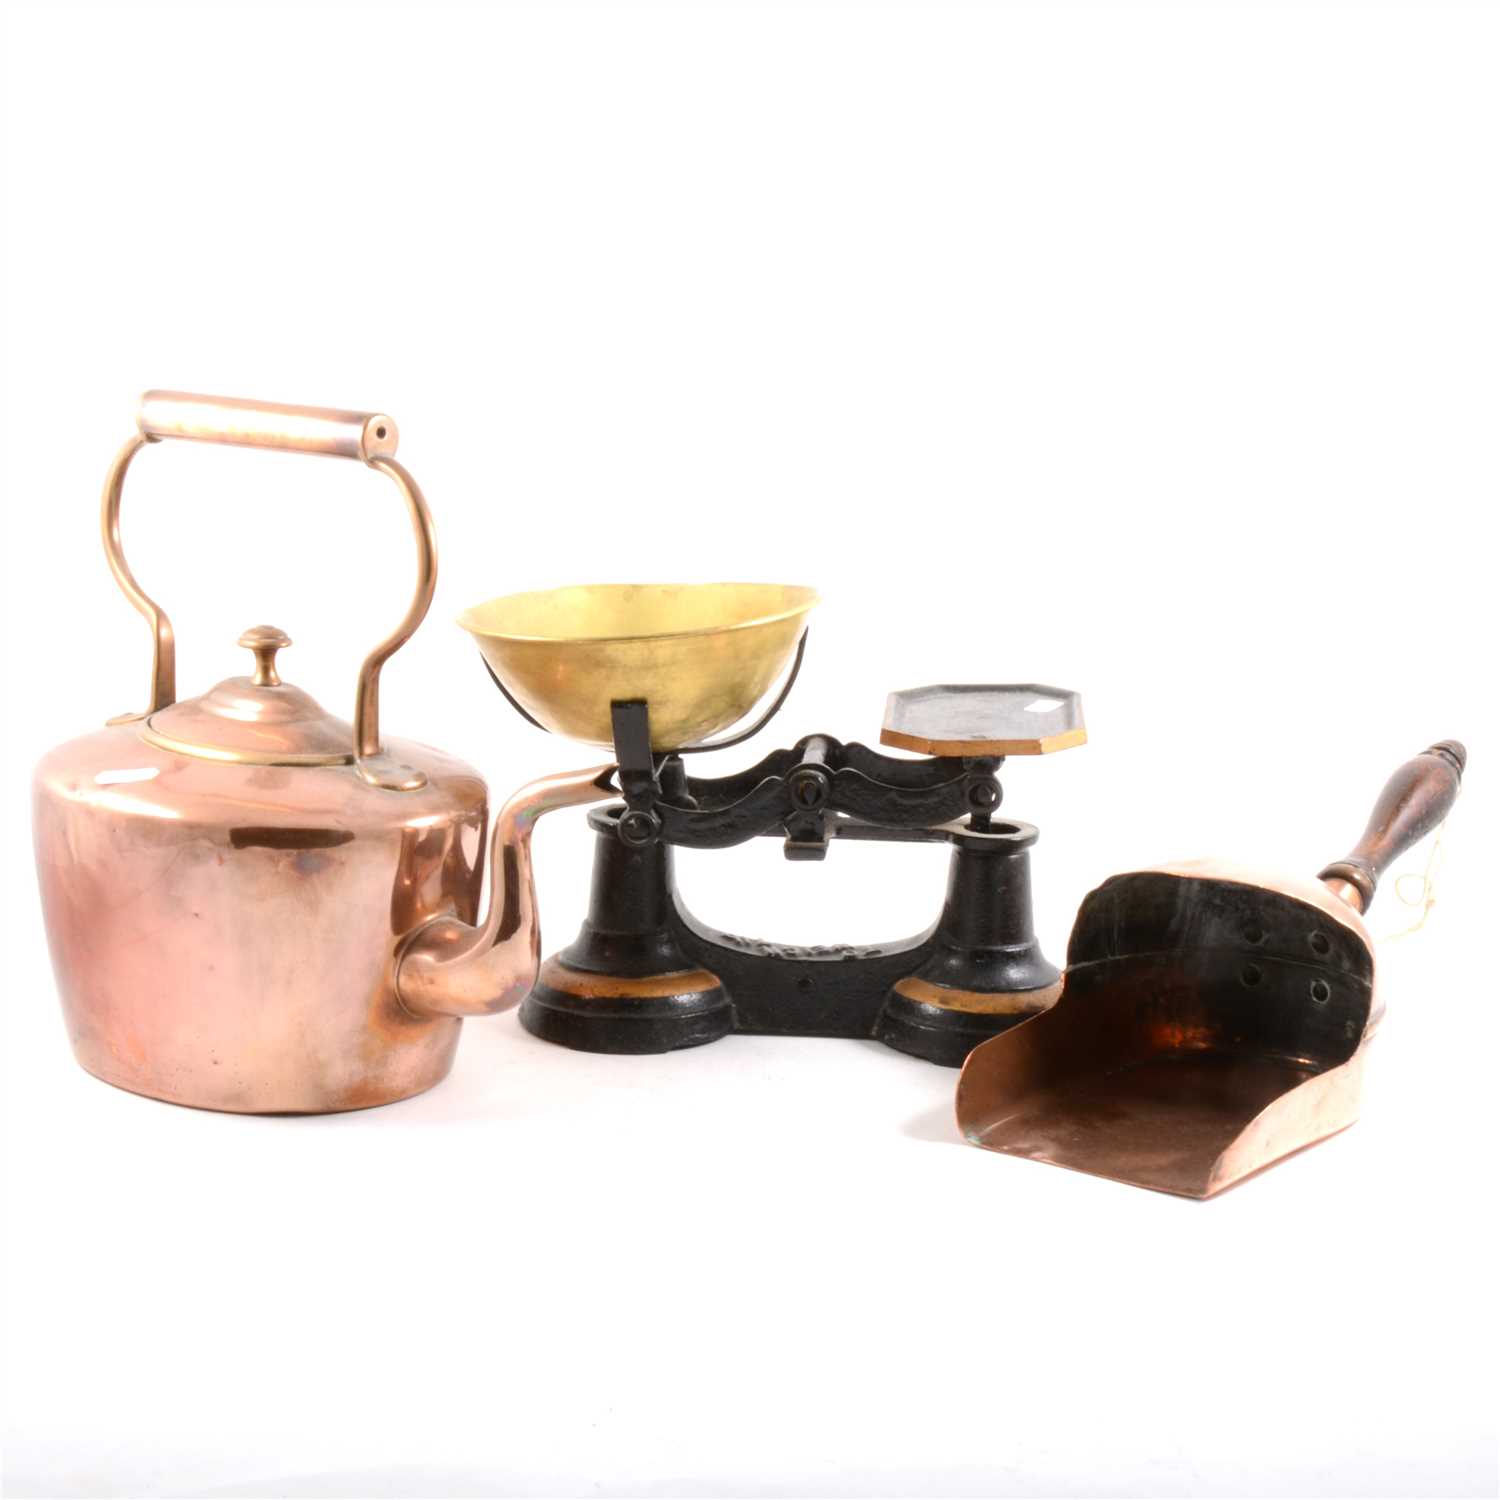 Lot 83 - A Victorian copper kettle, bras weights, and metalwares